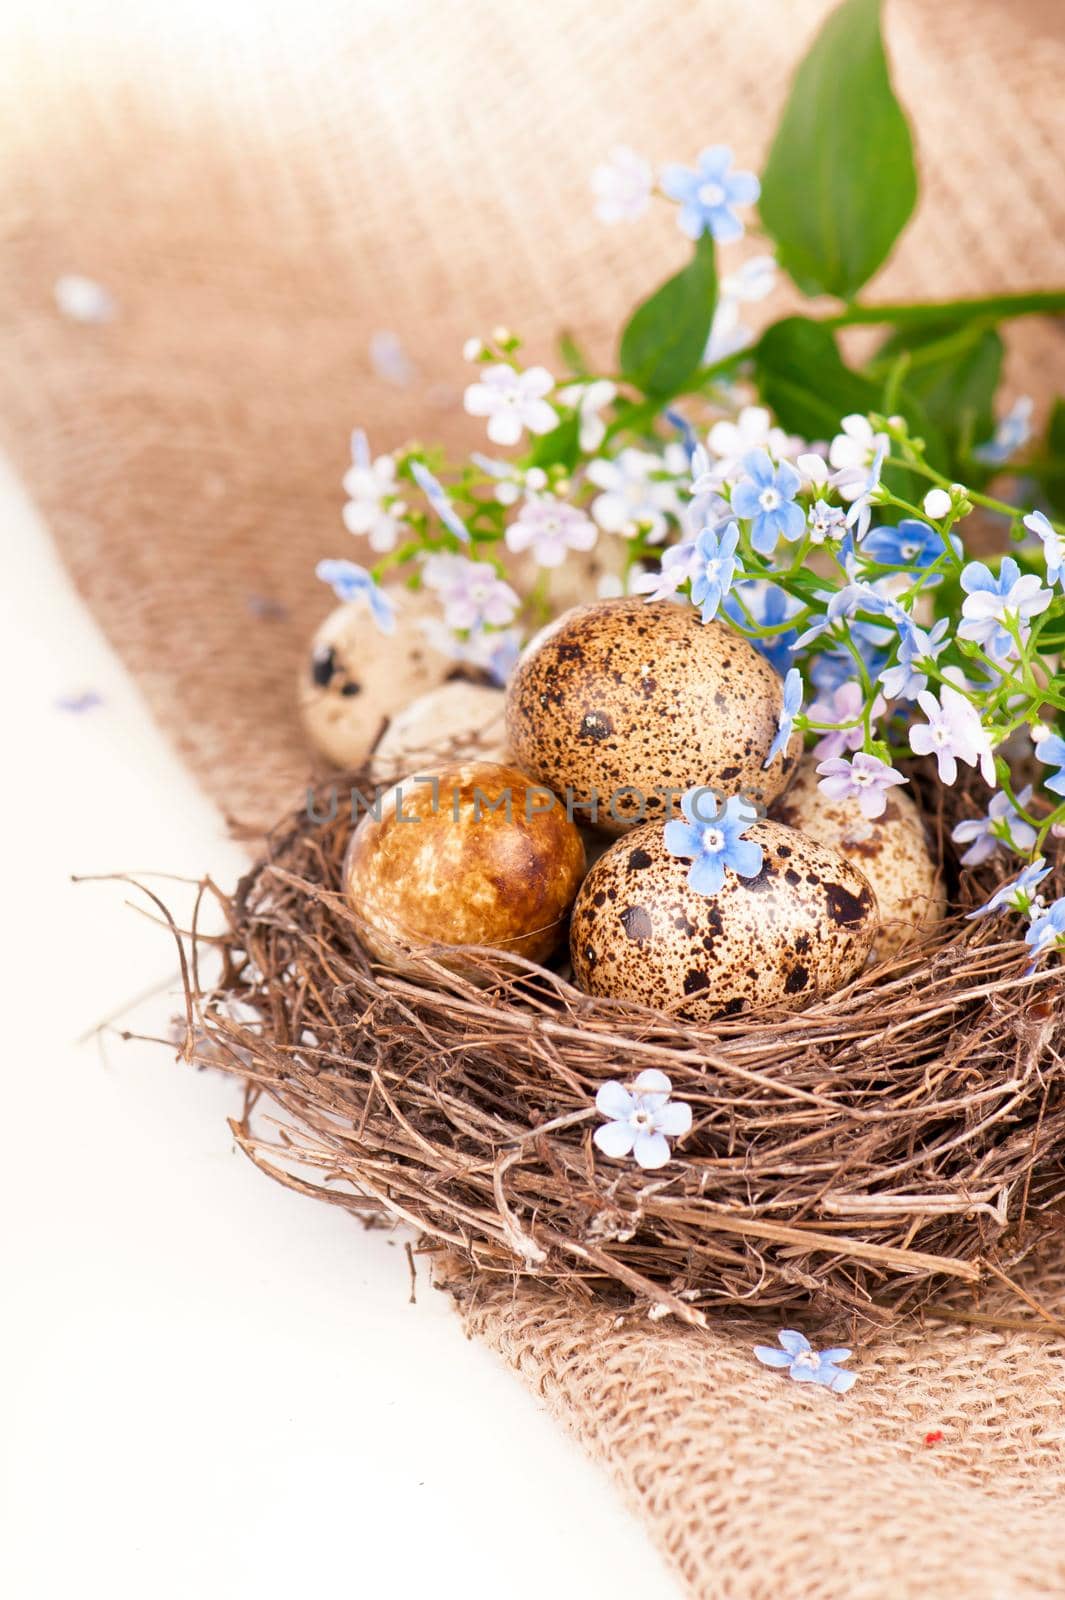 quail eggs and spring flowers by aprilphoto